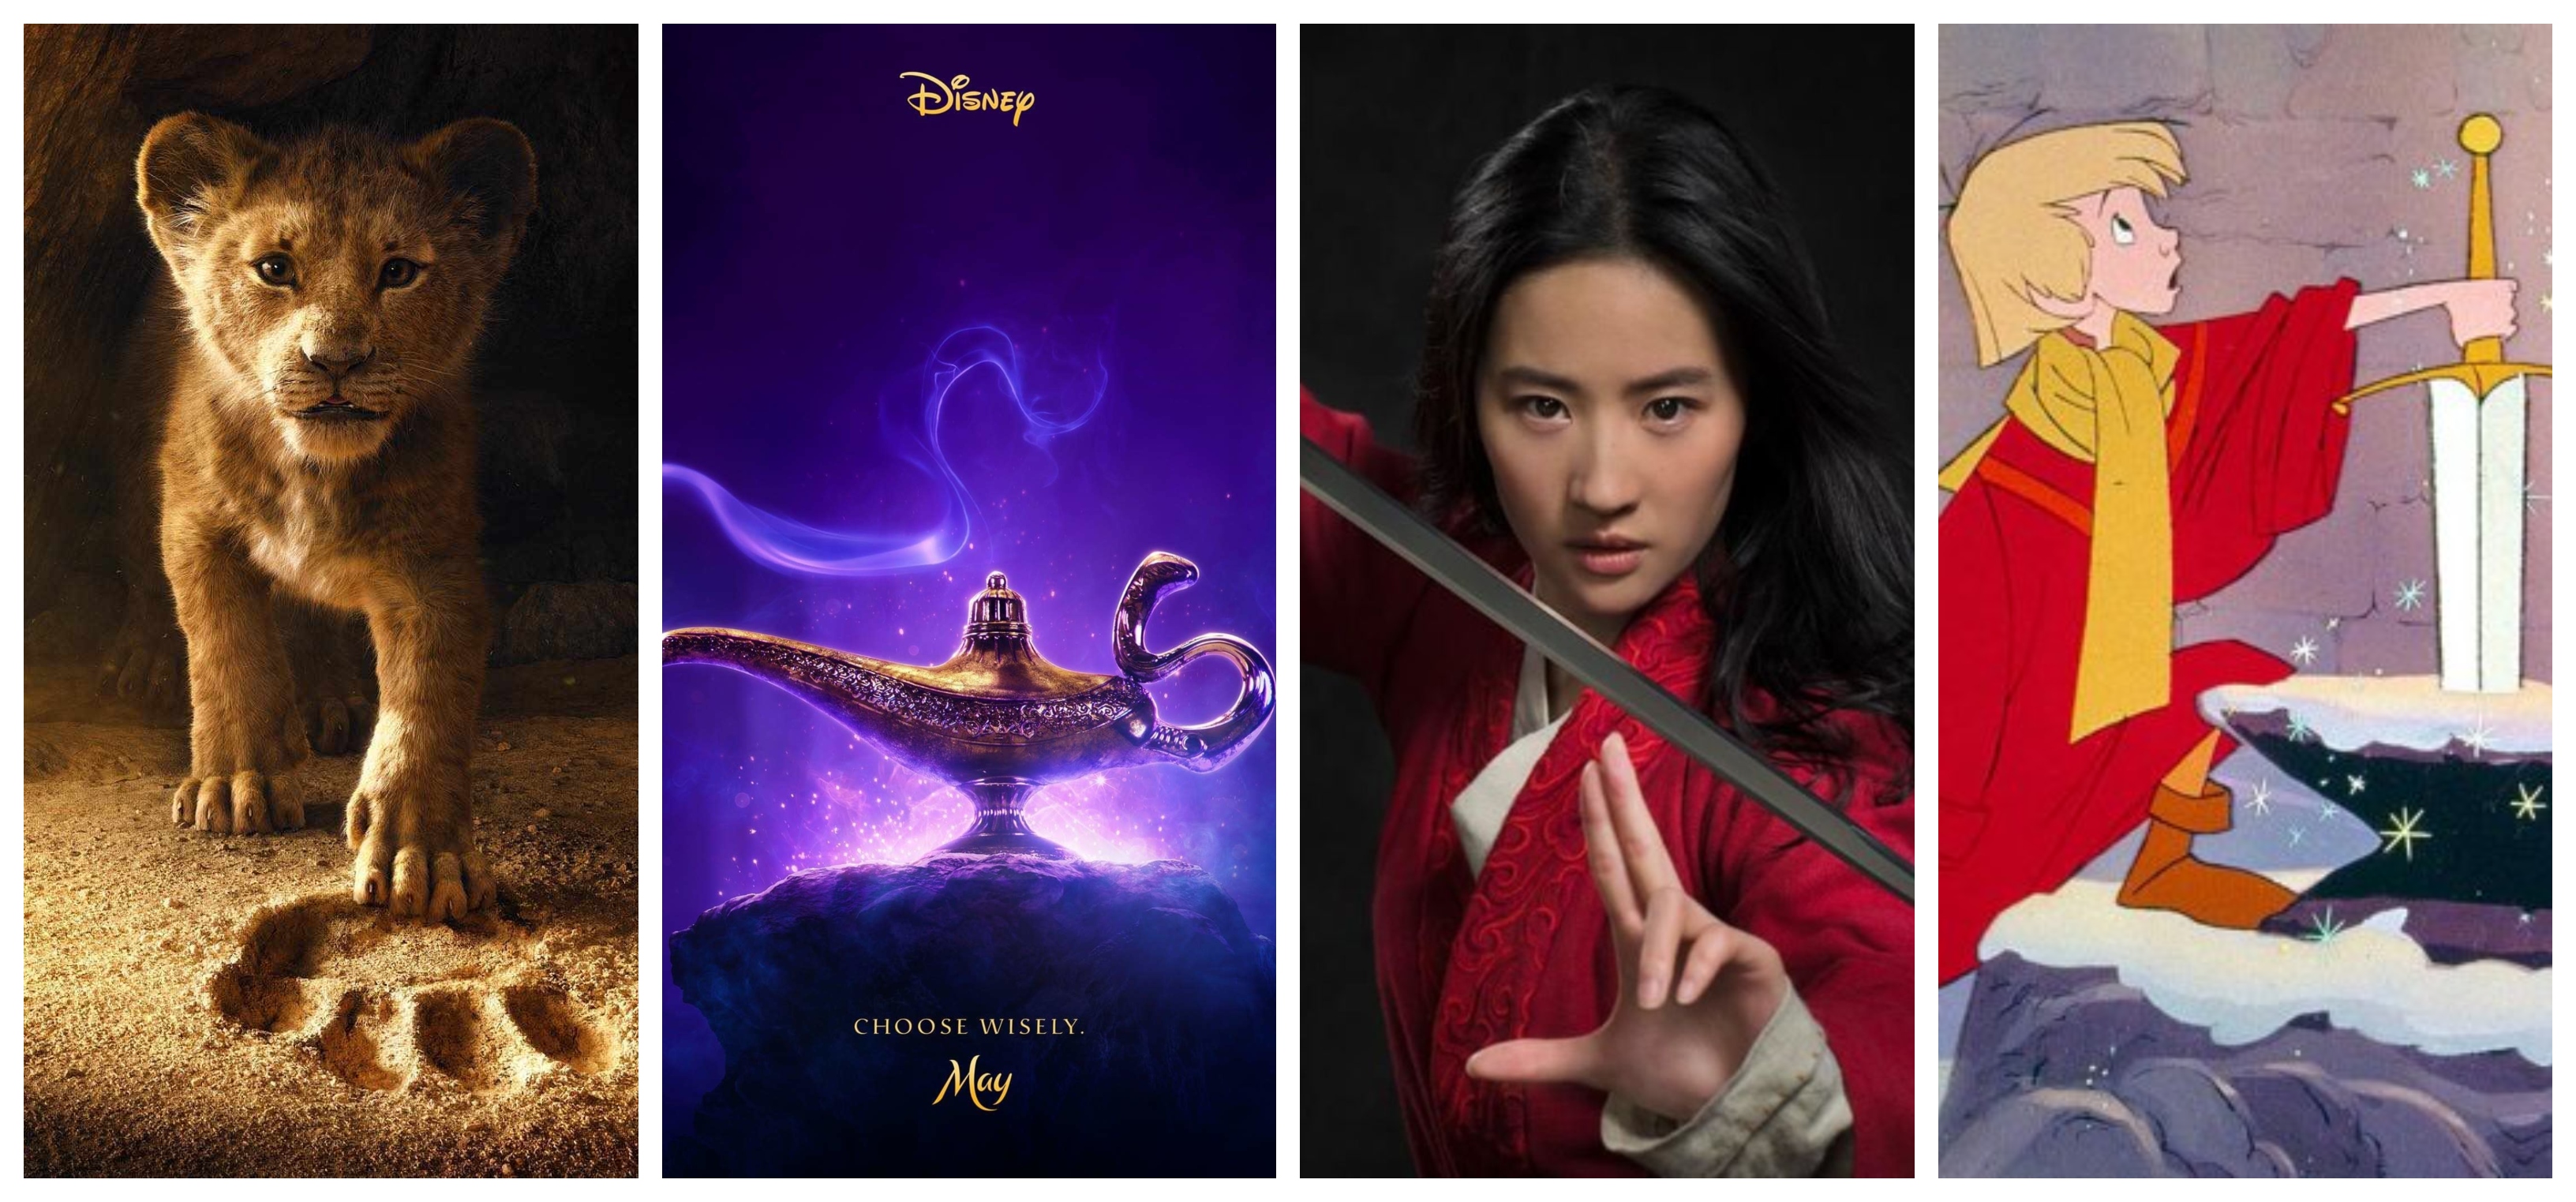 My Top 4 Disney Live Action Adaptations I’m Excited